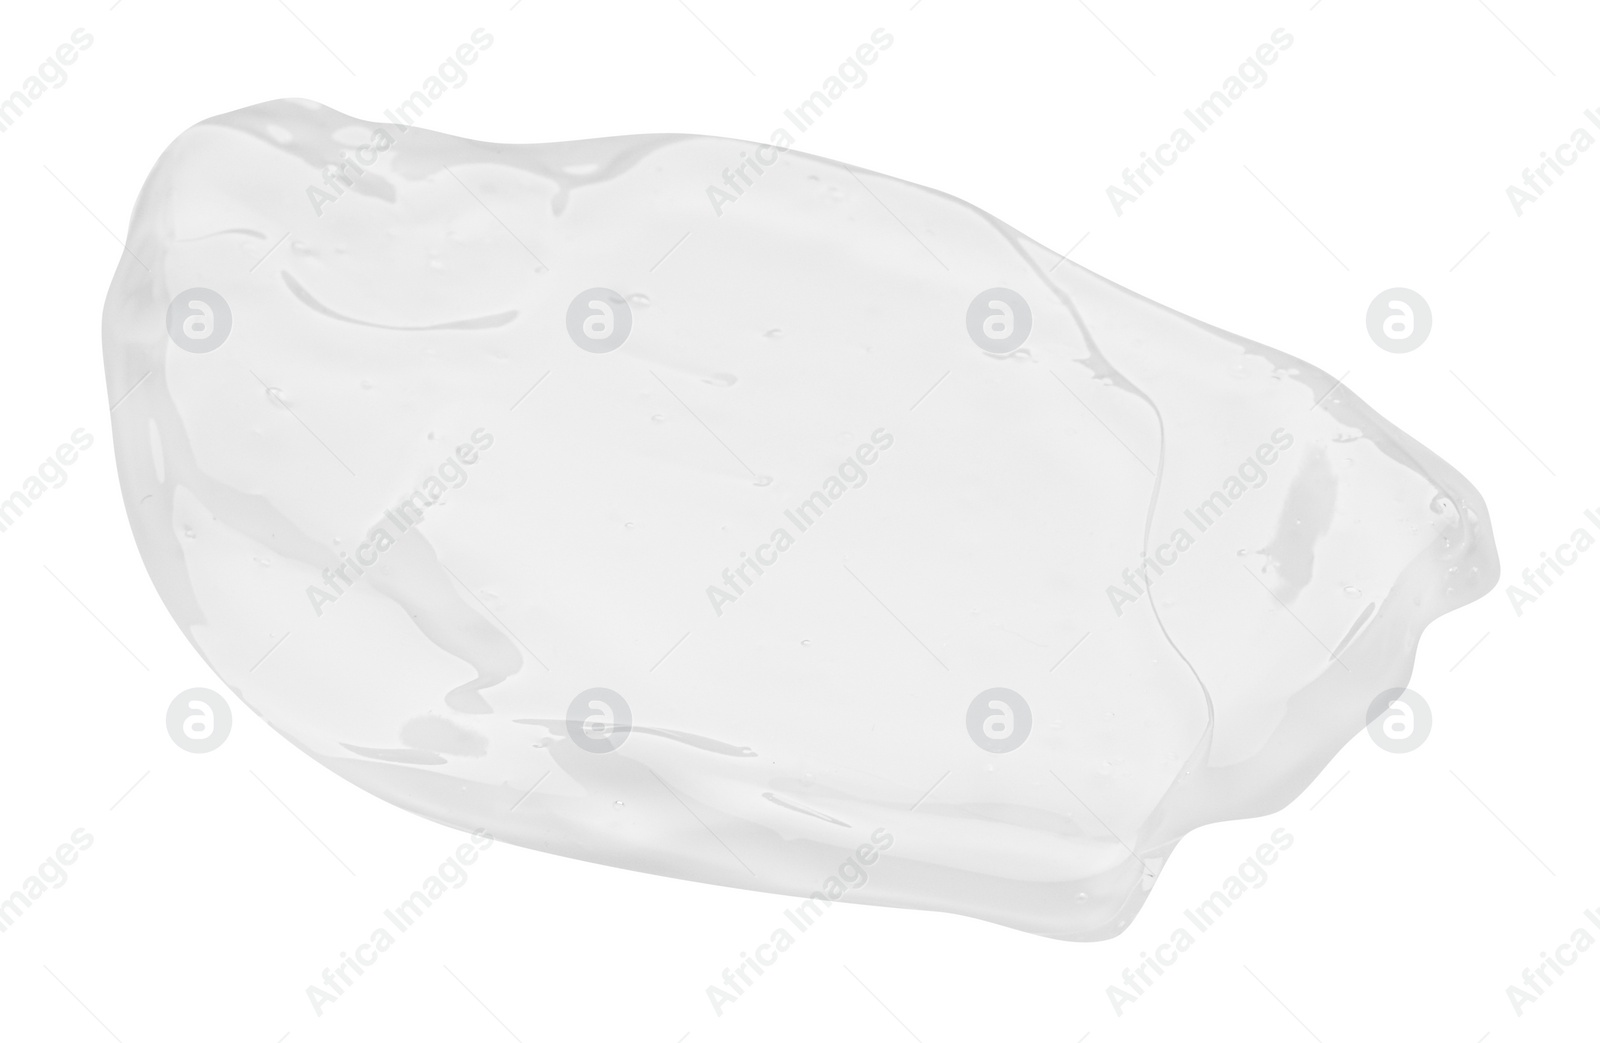 Photo of Sample of clear facial gel on white background